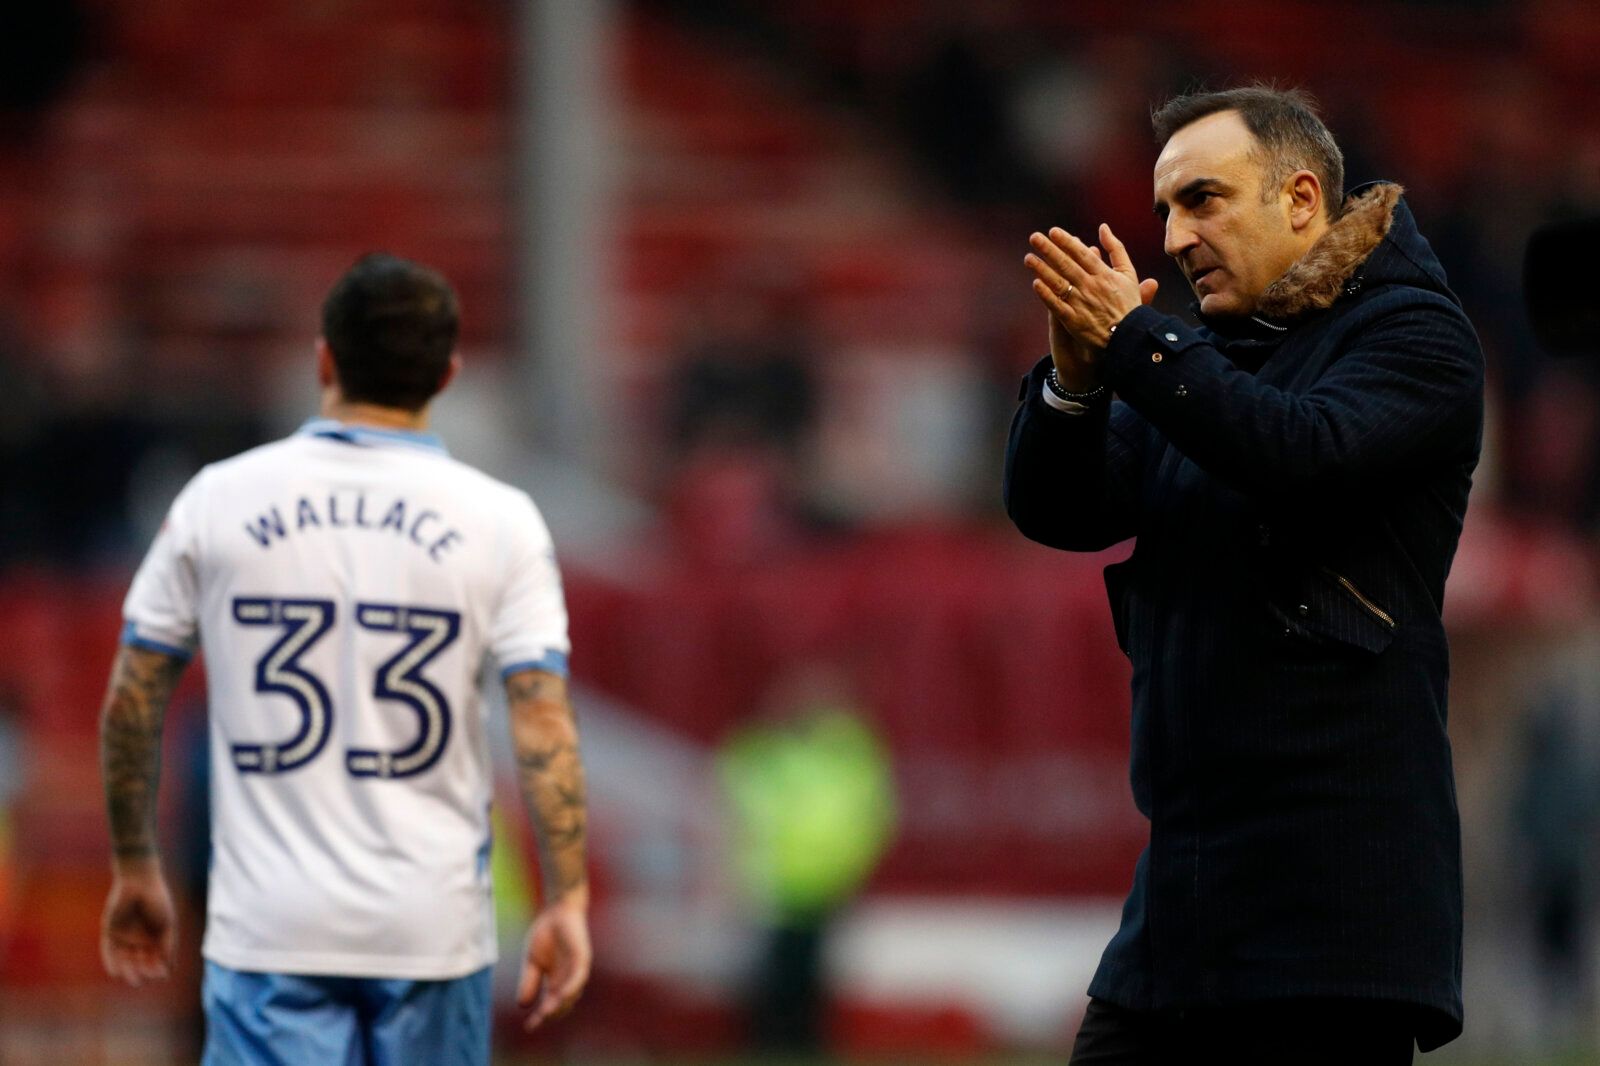 Britain Soccer Football - Nottingham Forest v Sheffield Wednesday - Sky Bet Championship - The City Ground - 18/2/17 Sheffield Wednesday manager Carlos Carvalhal celebrates after the final whistle Mandatory Credit: Action Images / John Sibley Livepic EDITORIAL USE ONLY. No use with unauthorized audio, video, data, fixture lists, club/league logos or 